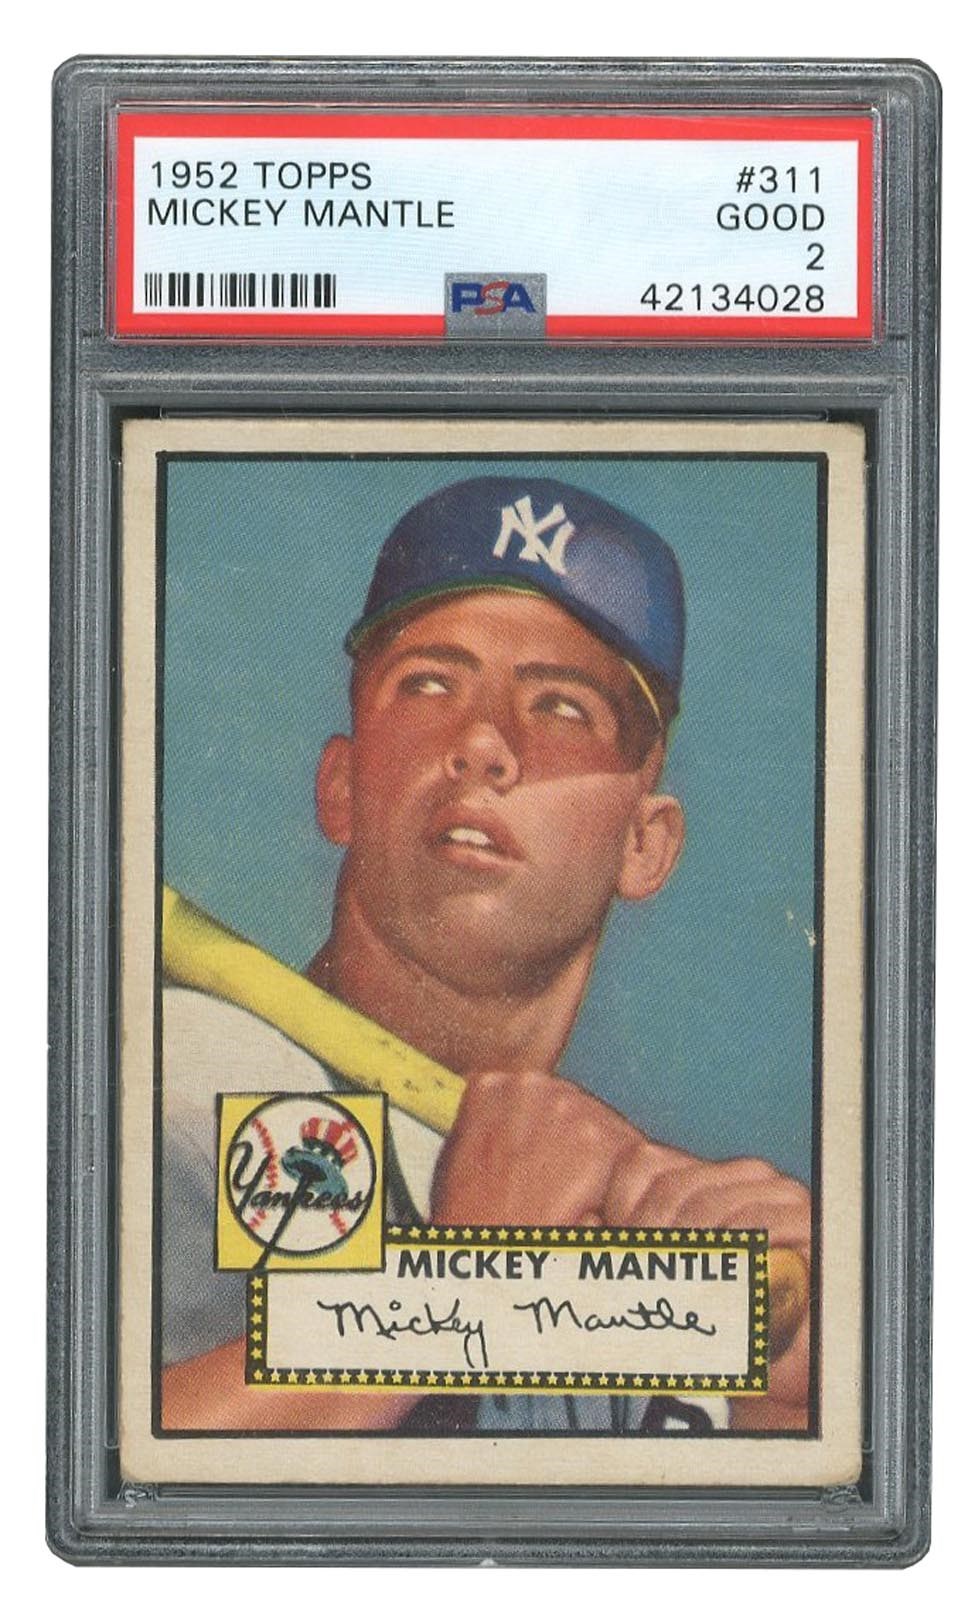 Kubina And The Mick - 1952 Topps #311 Mickey Mantle PSA Graded Rookie with Tremendous Eye Appeal